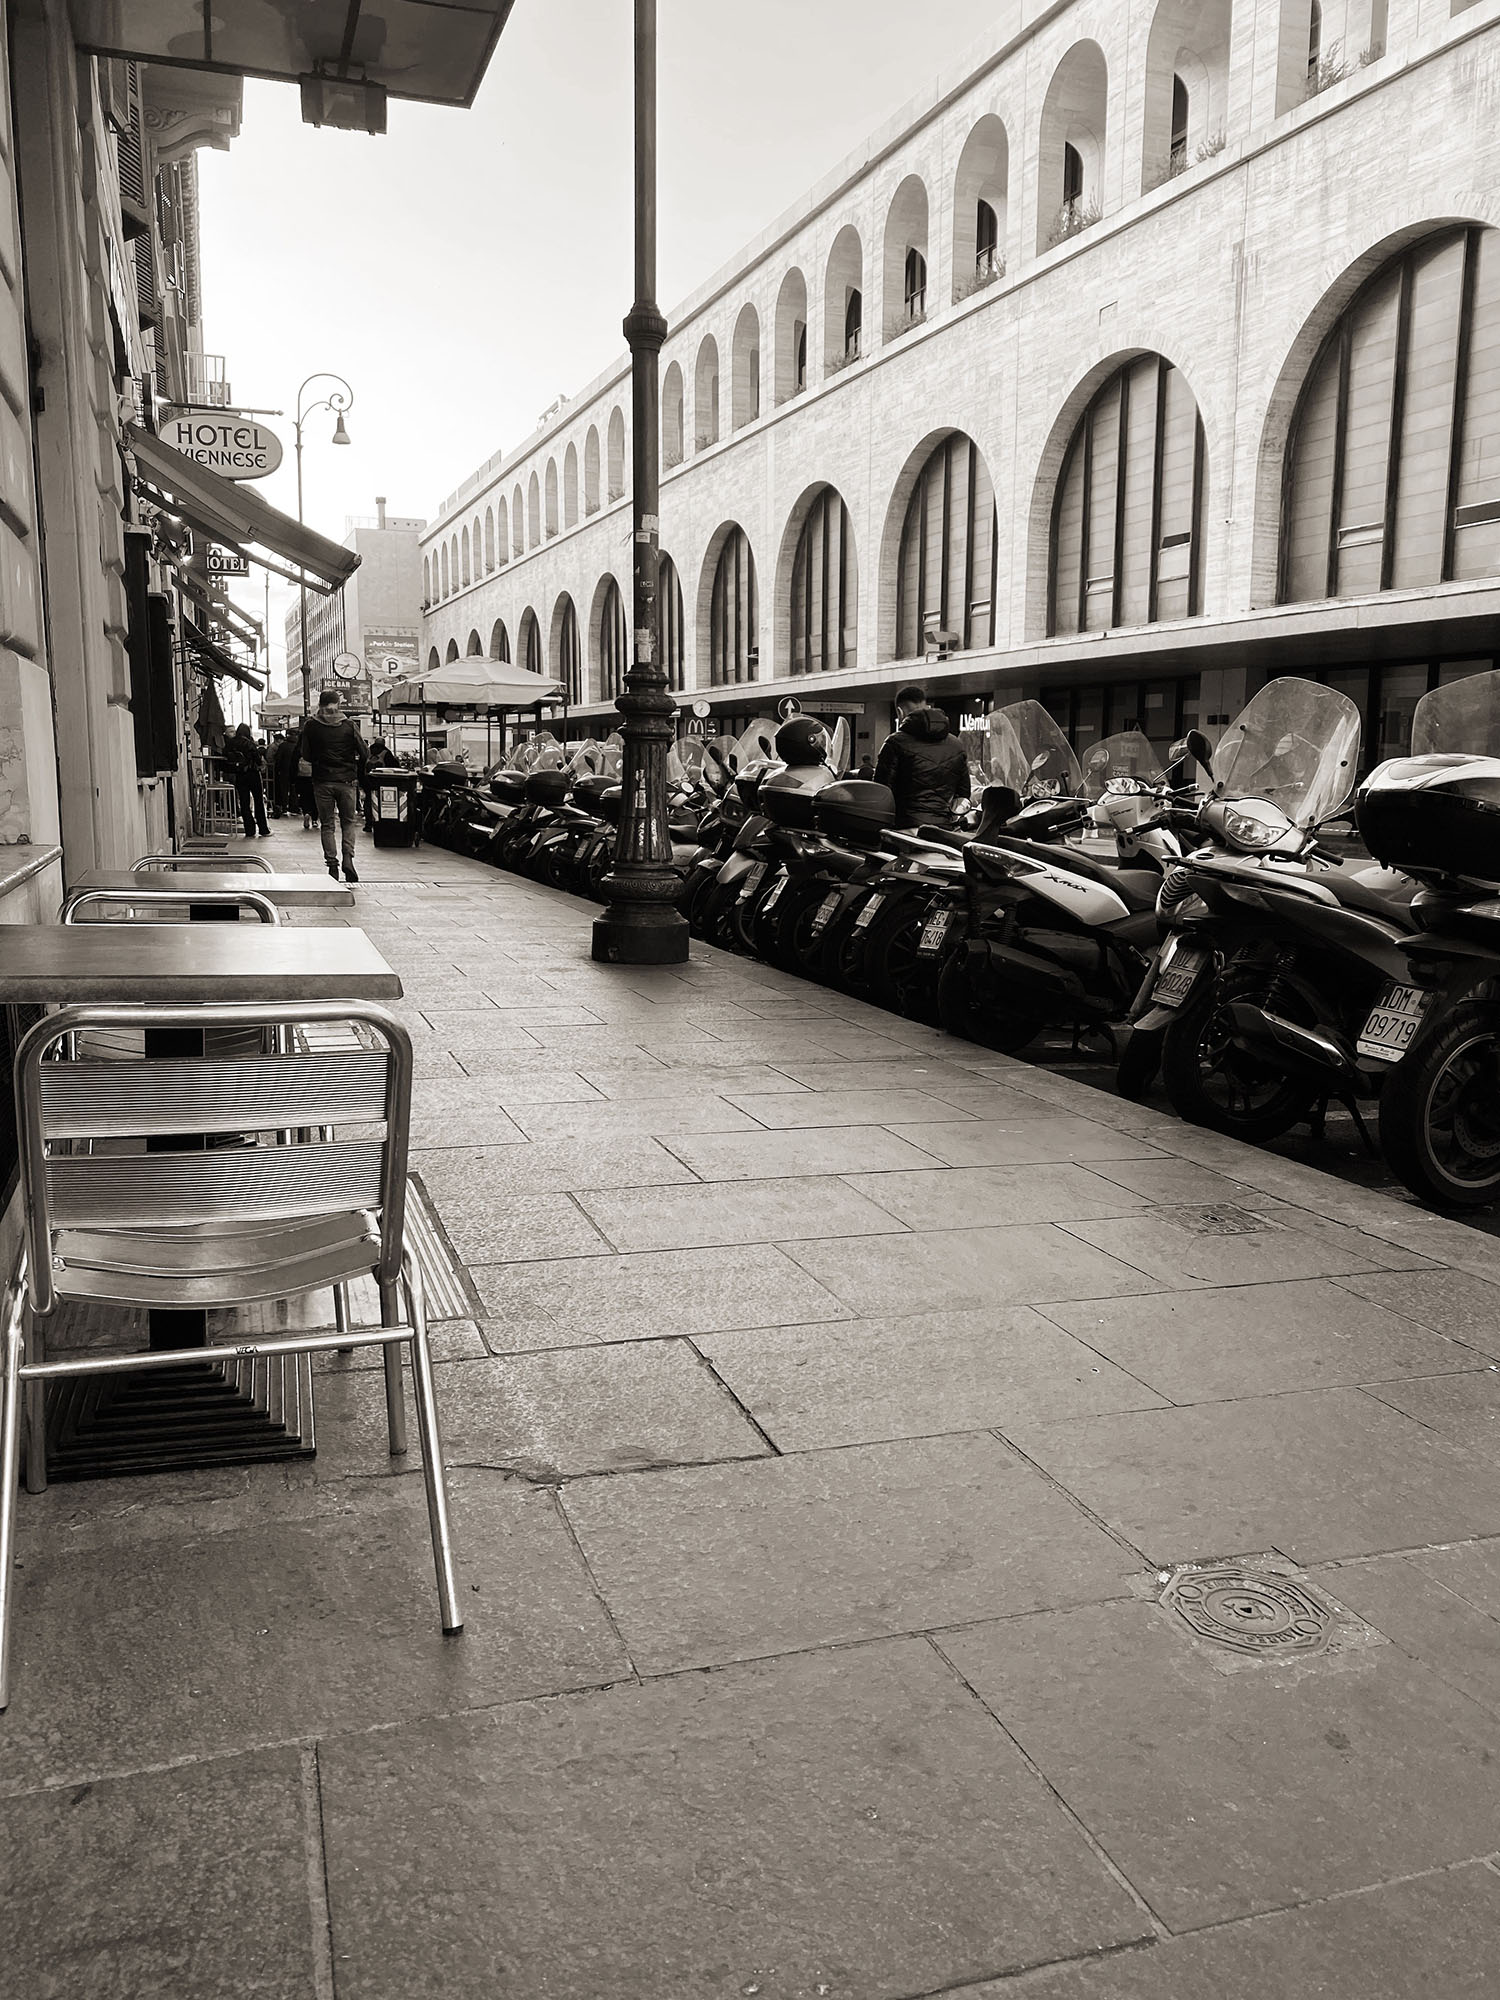 Coco & Vera - Motorcyles and cafe tables across the street from Termini Station in Rome